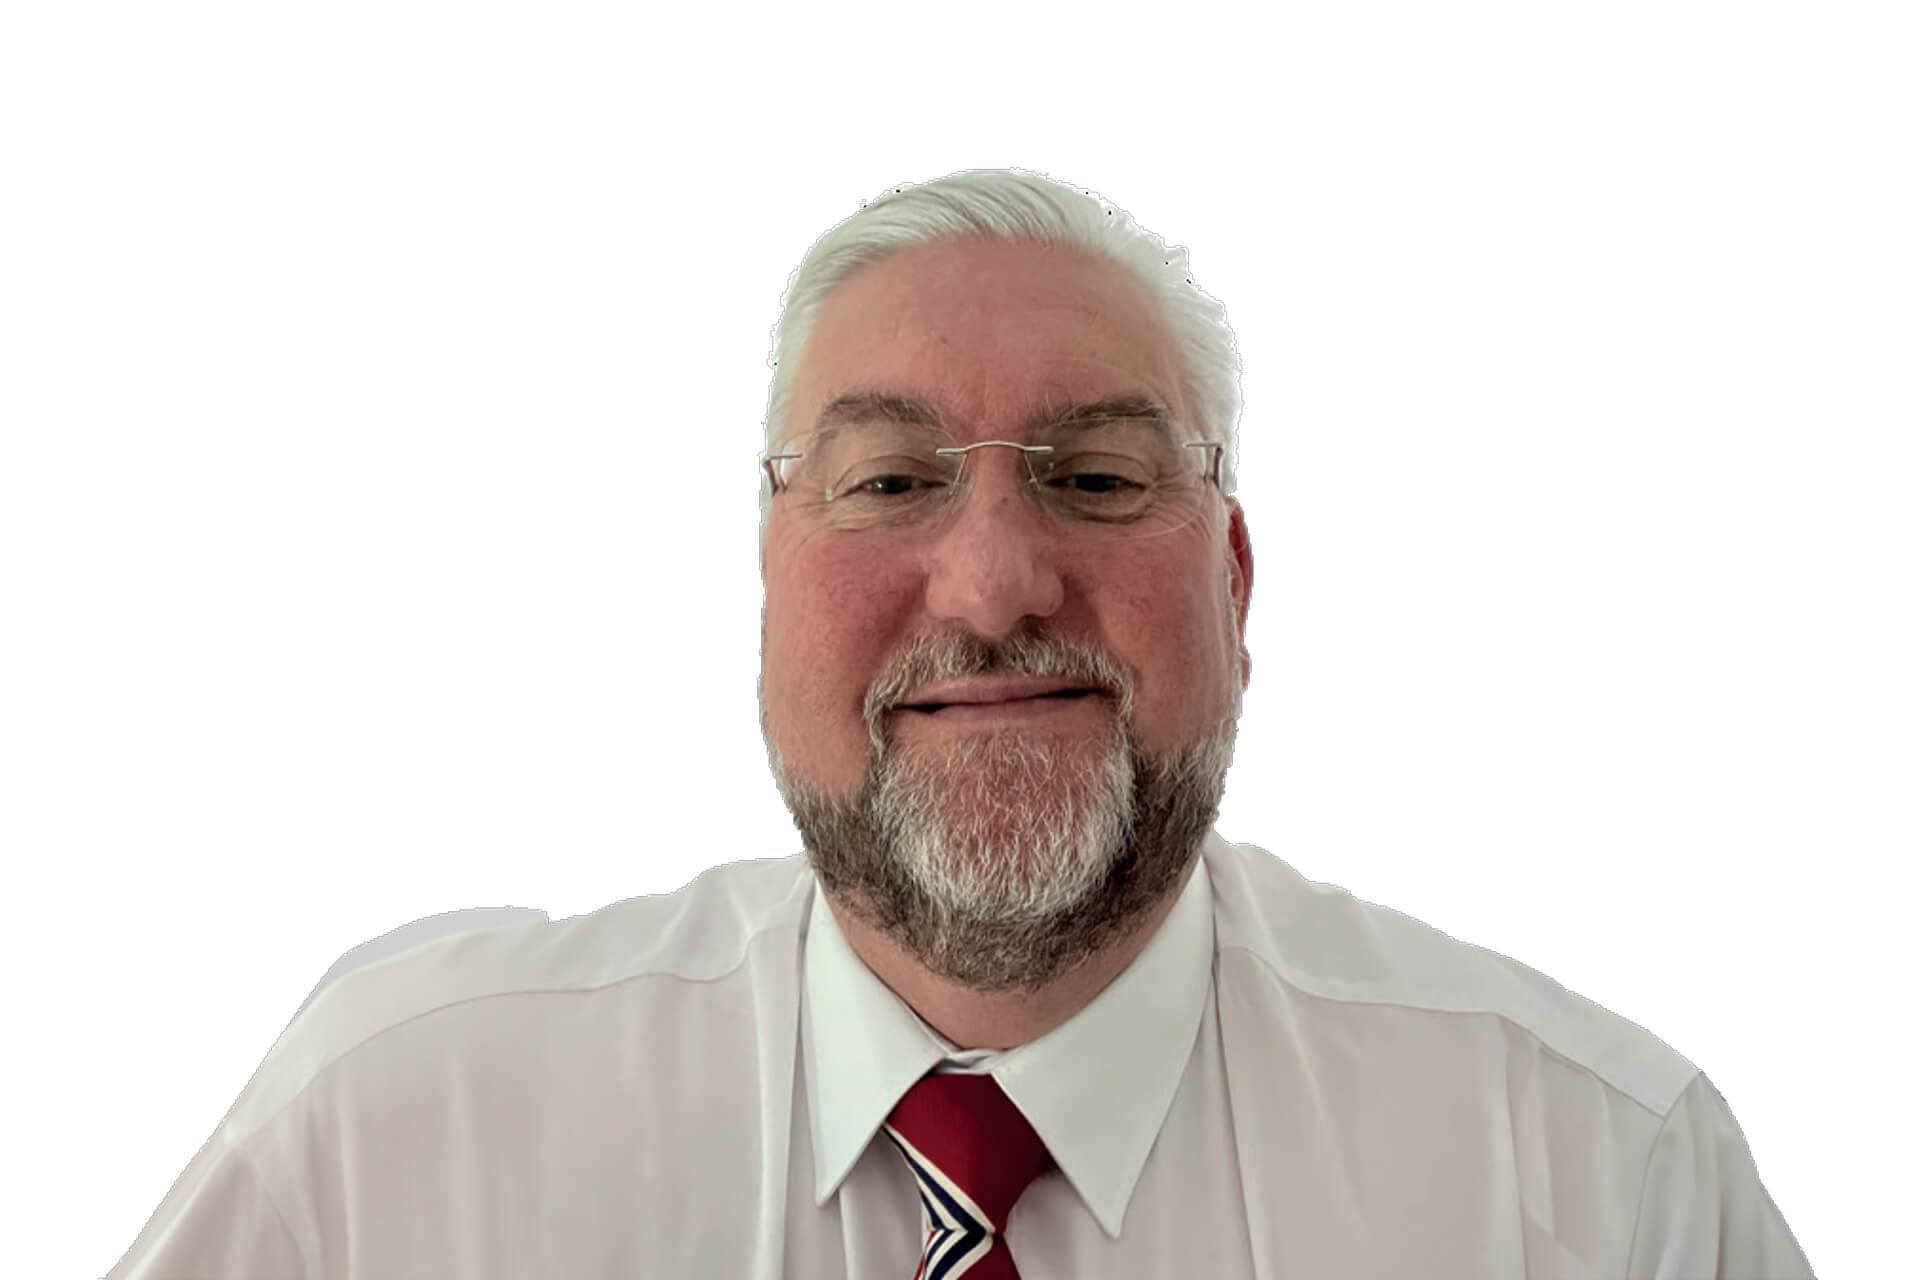 Featured image for “Retirement Security introduces Paul O’Brien, our new Services Manager”